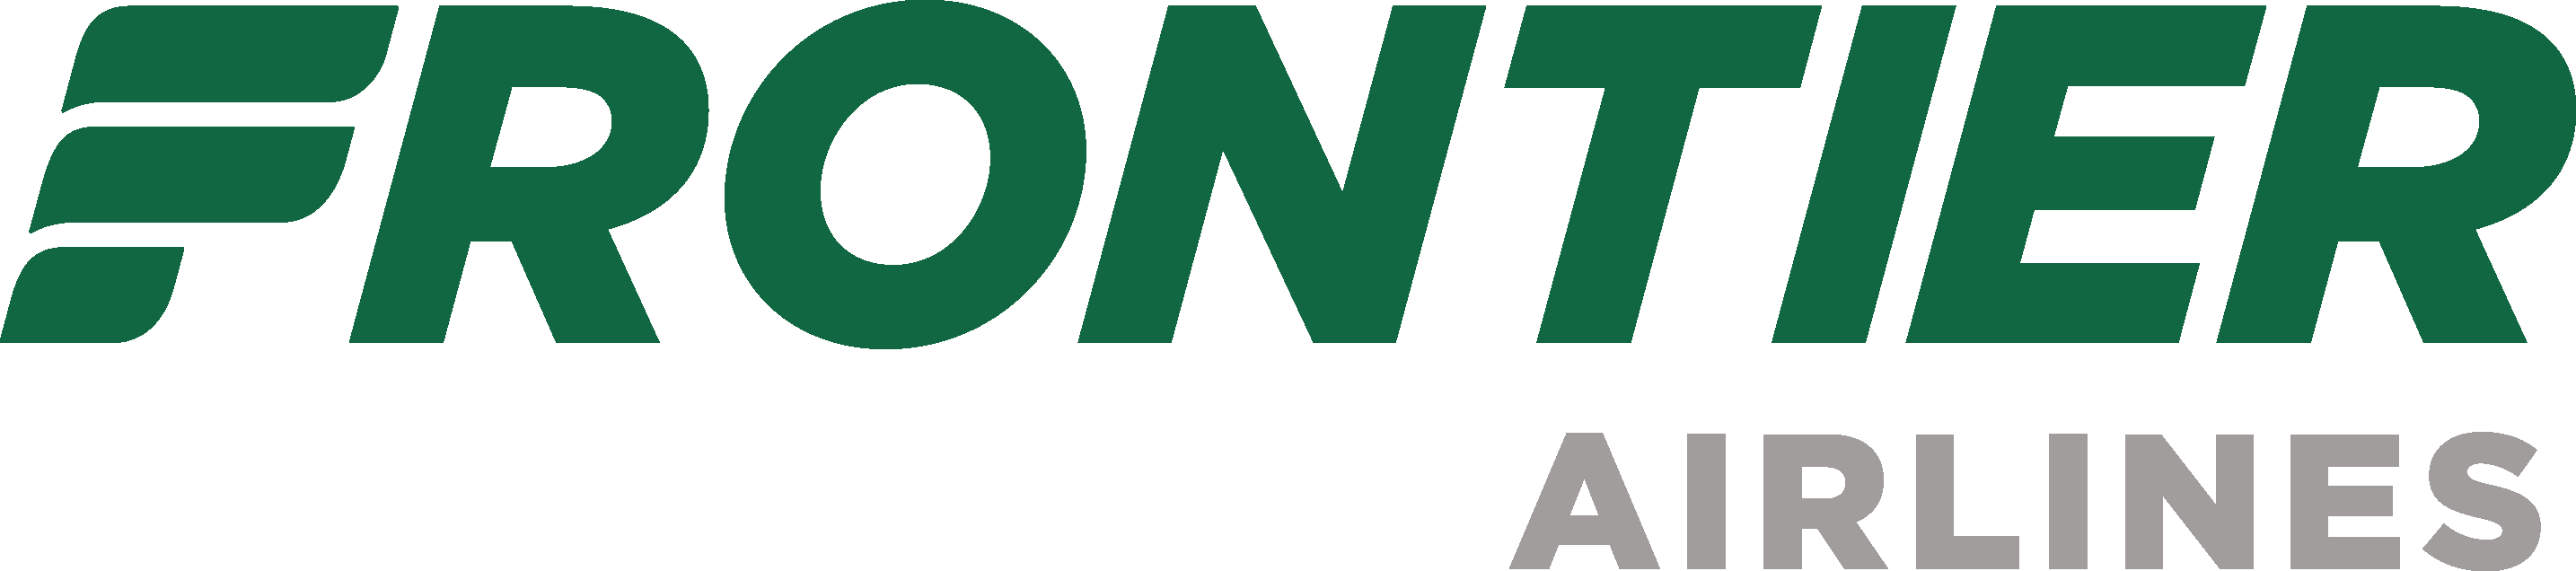 Frontier Airlines Logo png